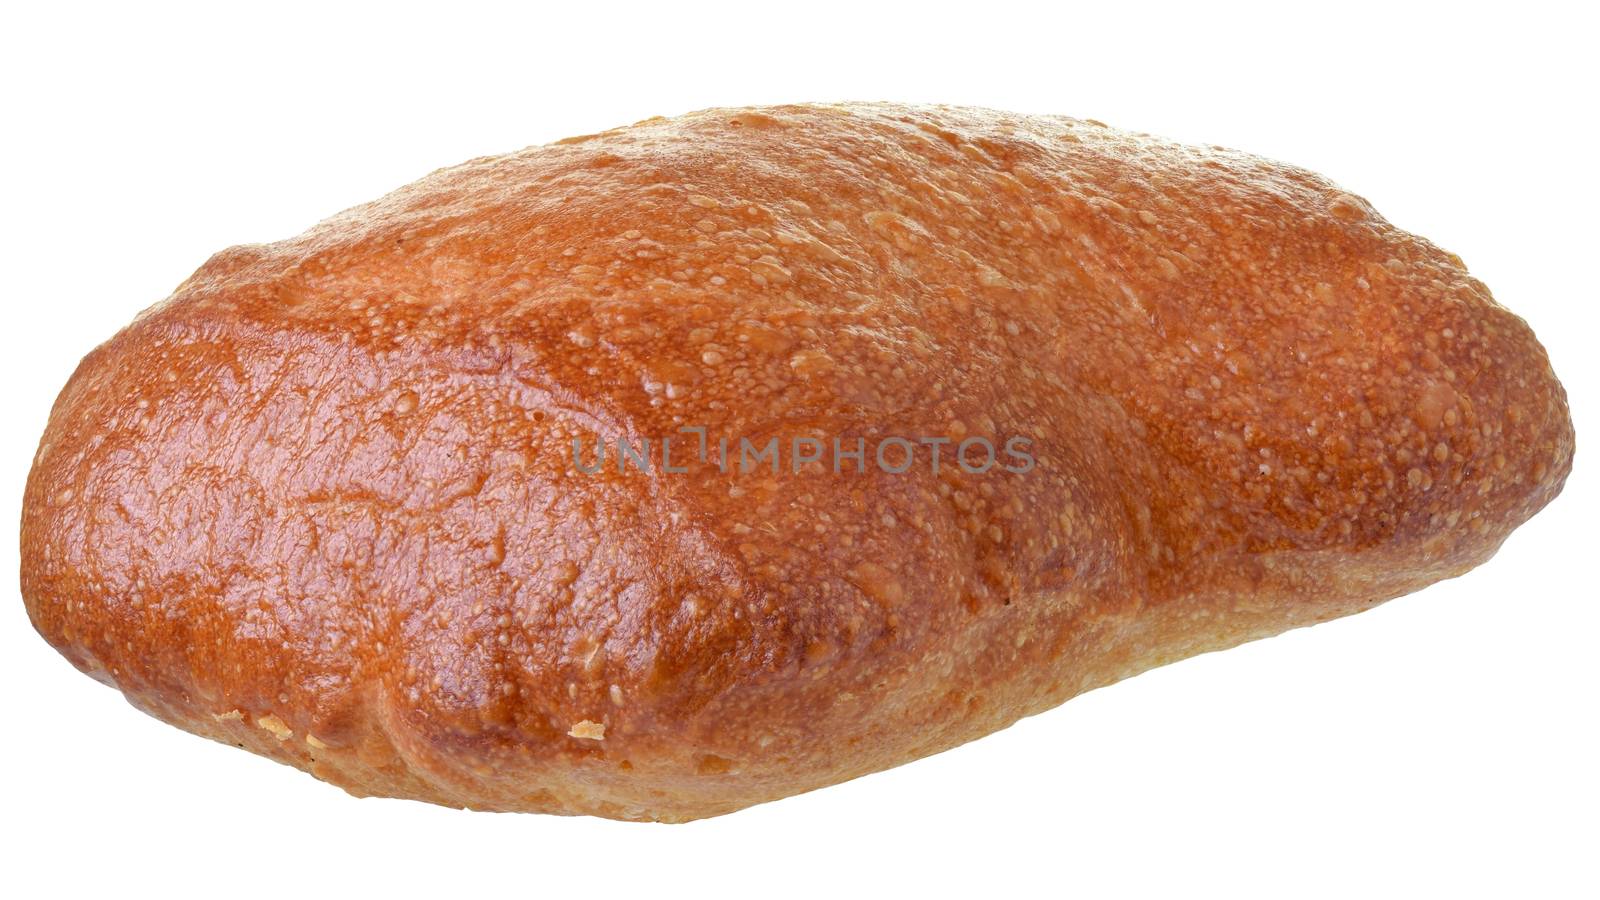 Fresh brown grain bread isolated on a white background.